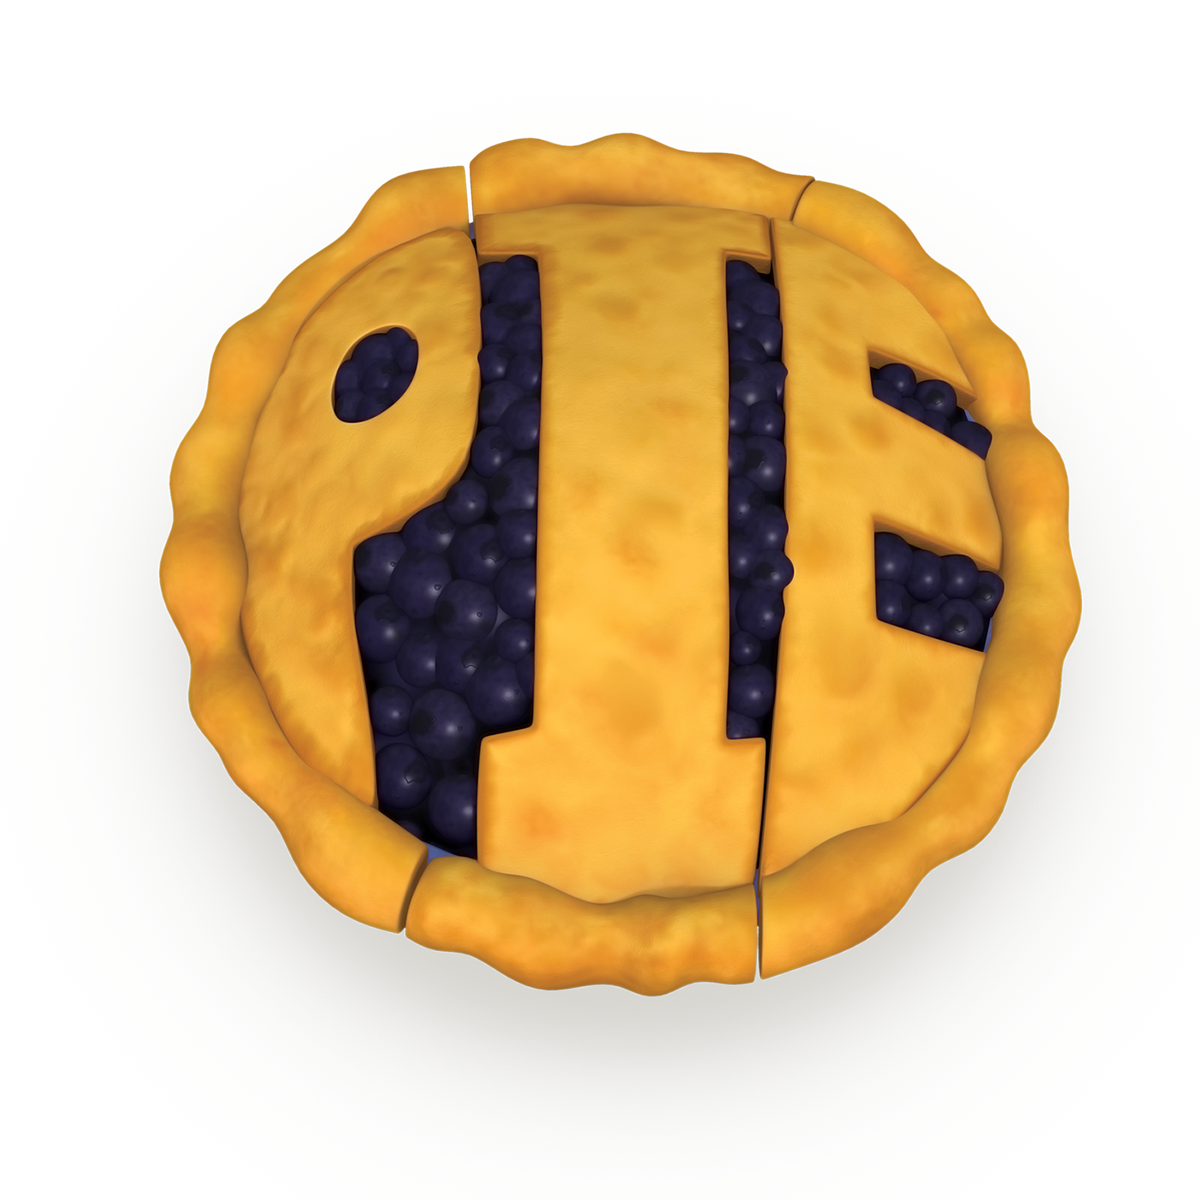 Pie PNG HD Image